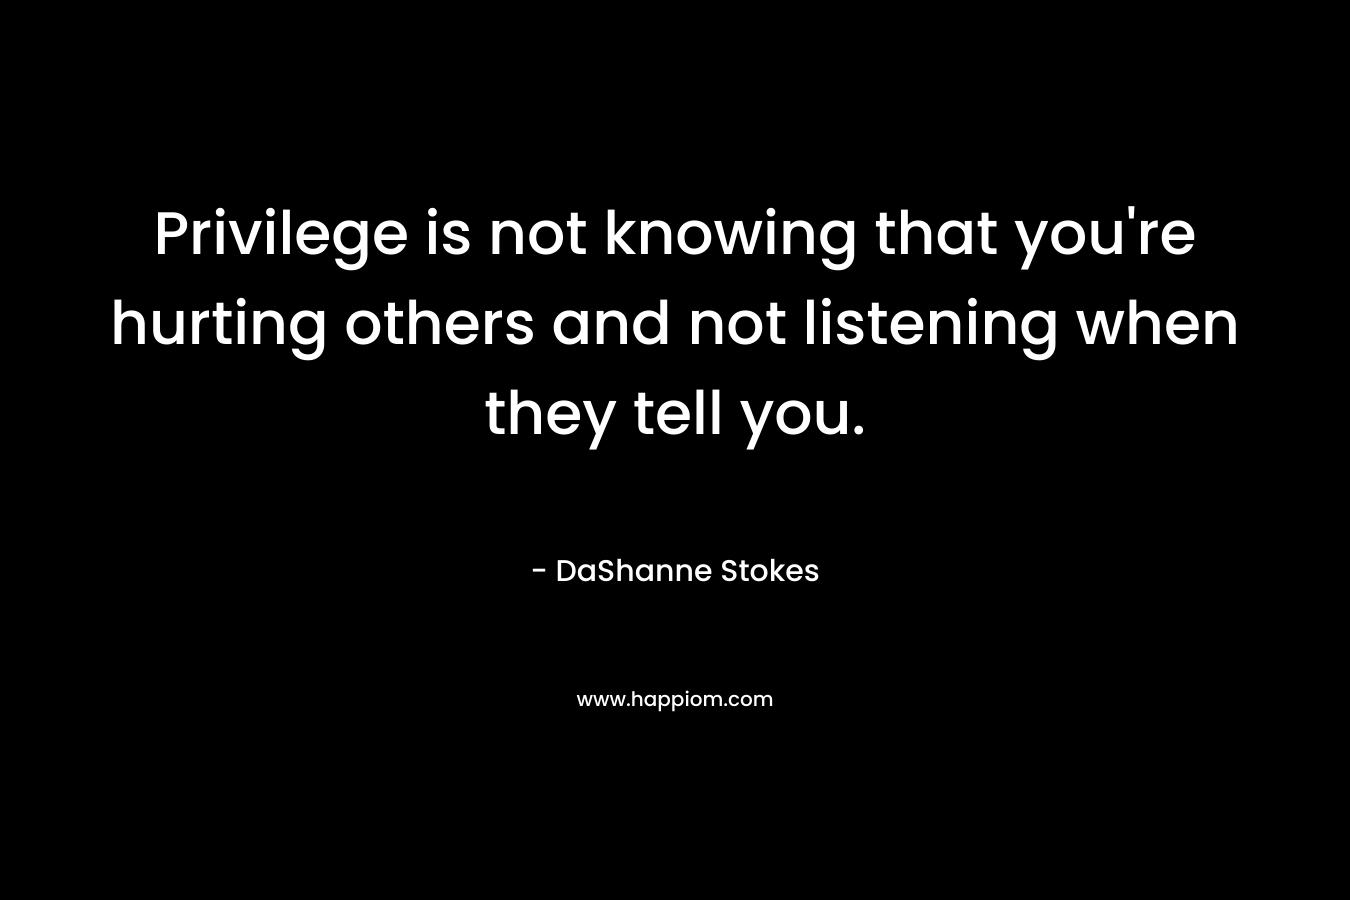 Privilege is not knowing that you’re hurting others and not listening when they tell you. – DaShanne Stokes